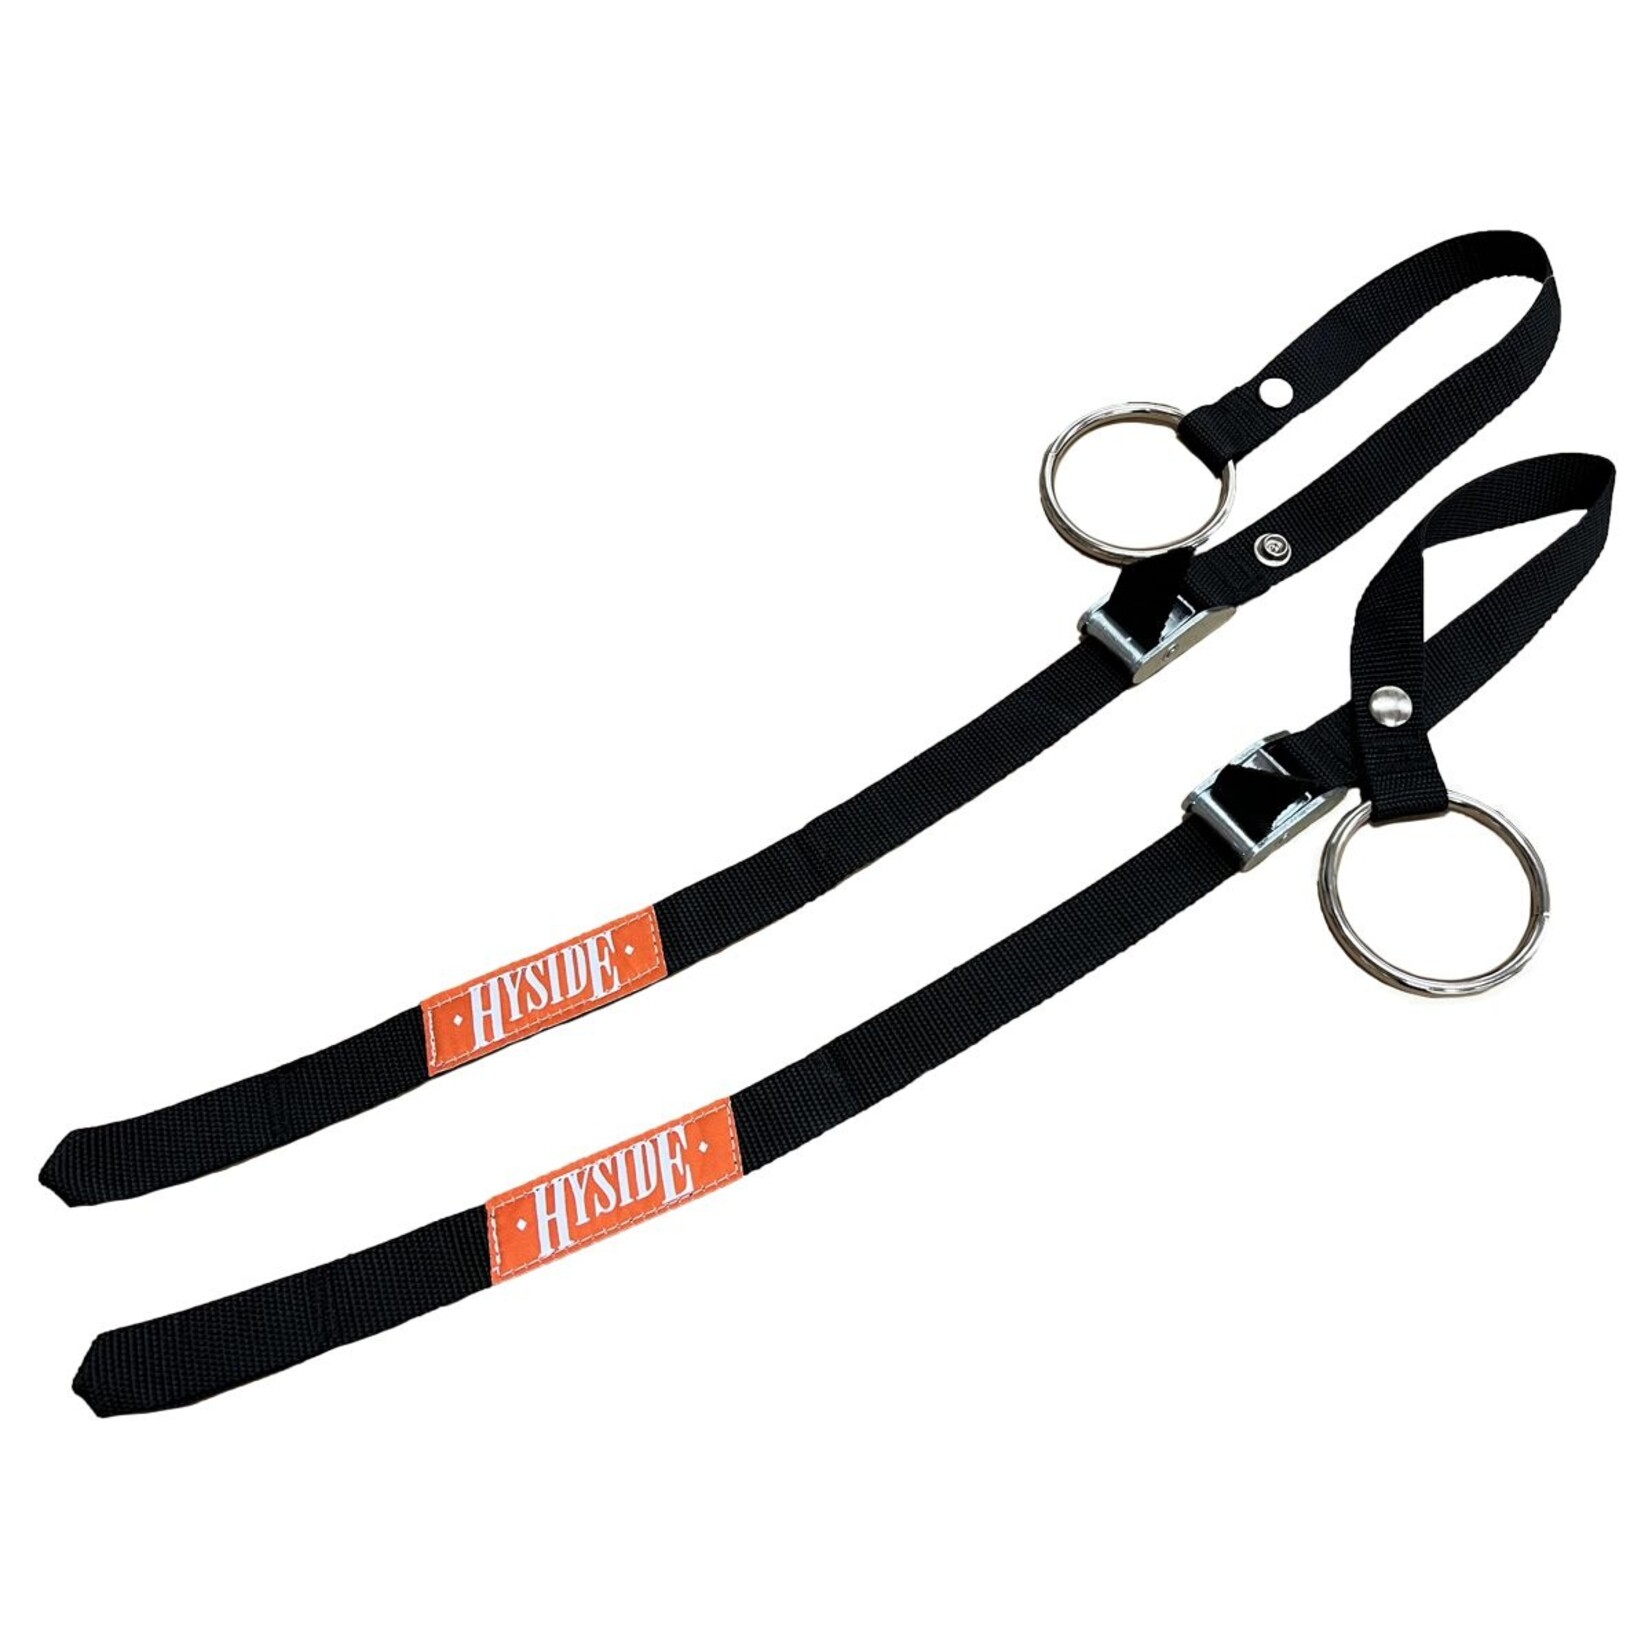 Hyside Inflatables Hyside Oar Tethers (Leash)